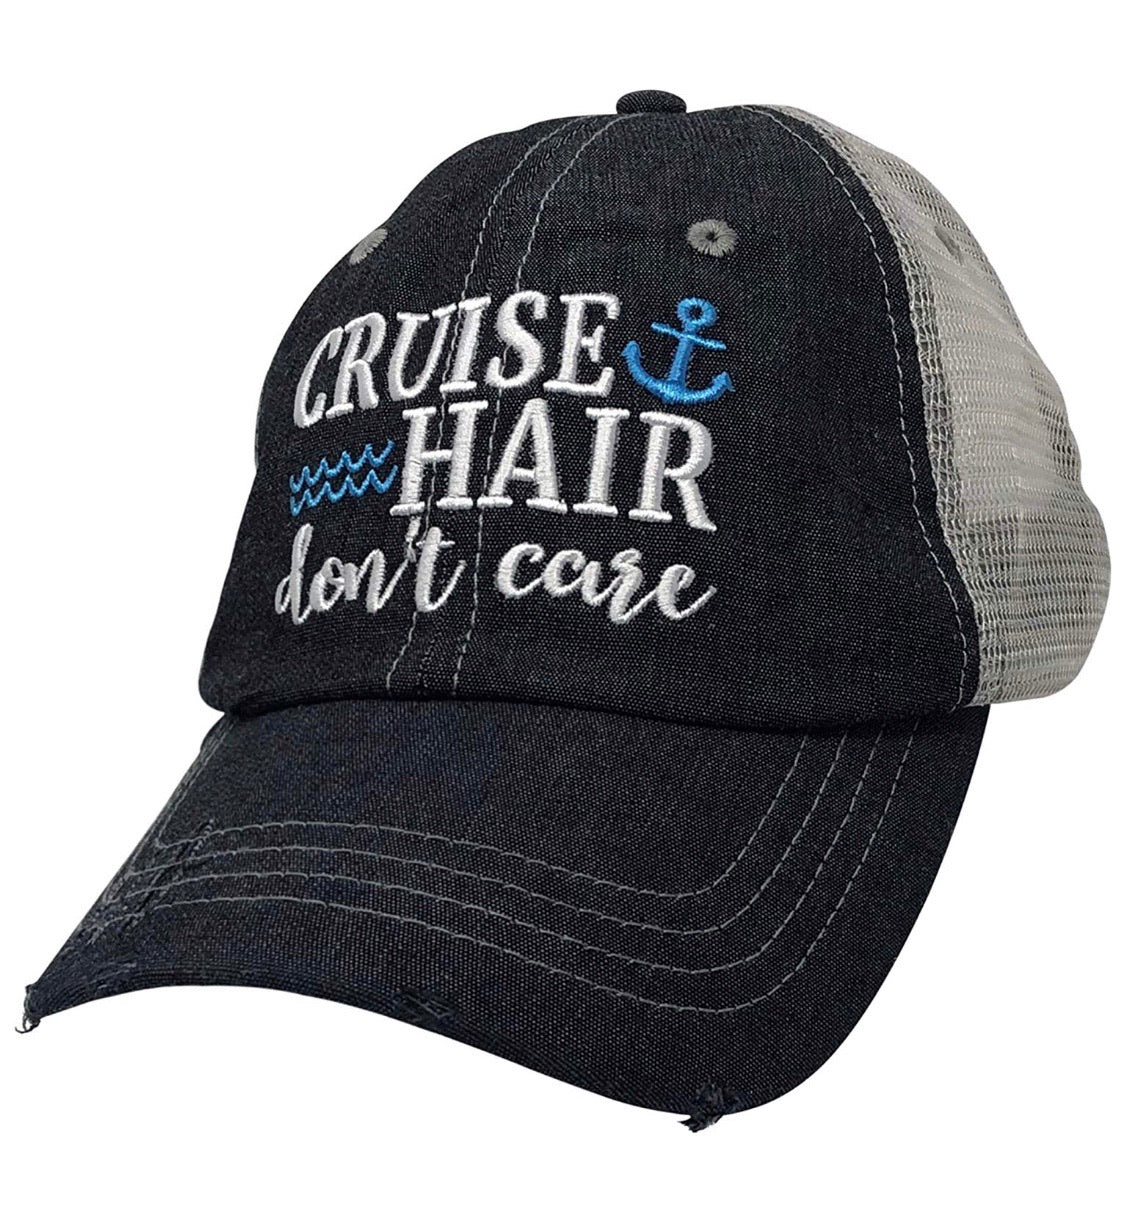 cruise hair don't care hat